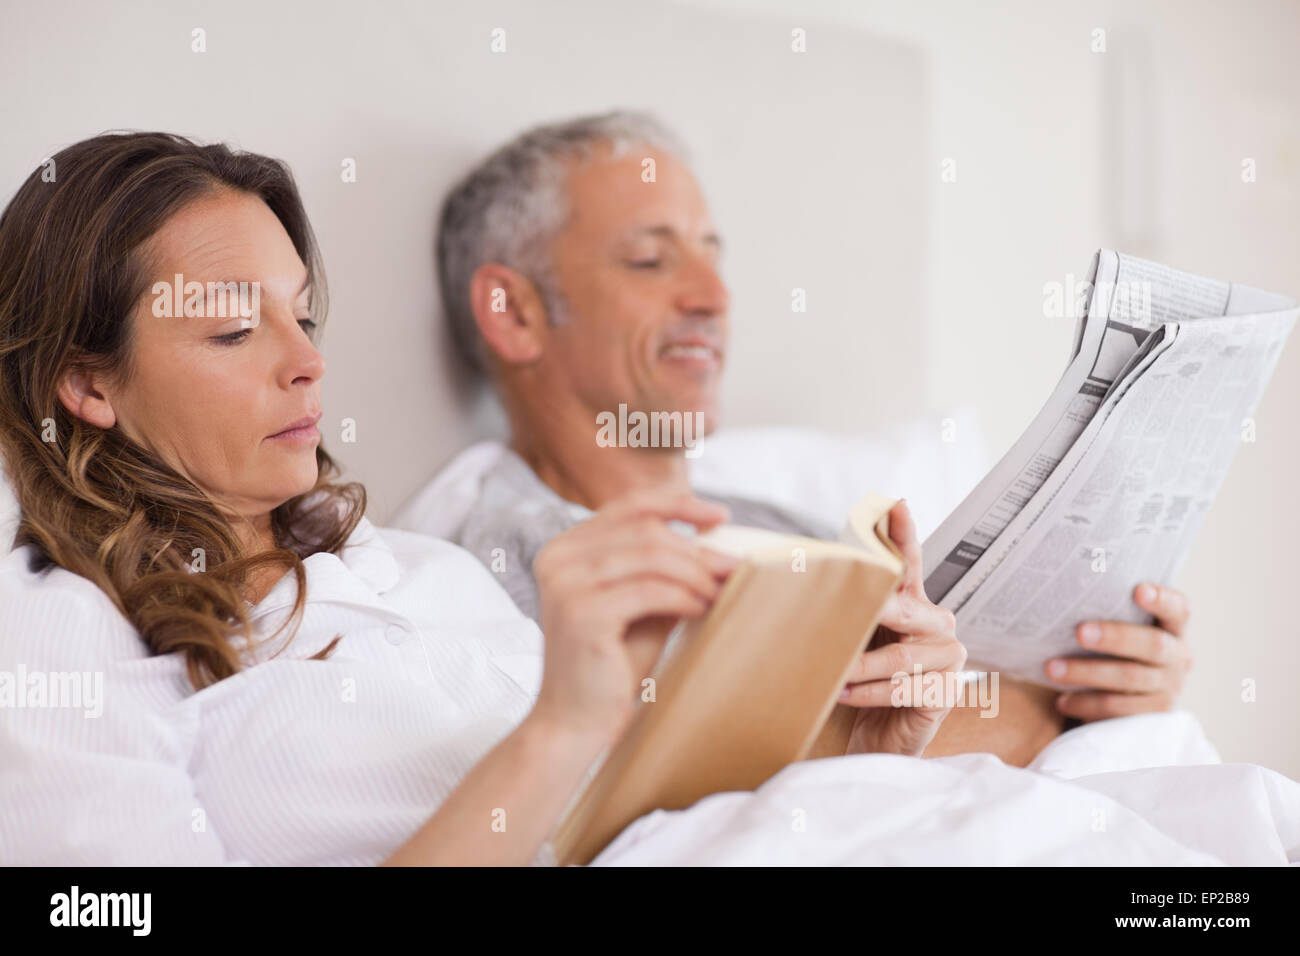 Woman reading a book while her husband is reading a newspaper Stock Photo